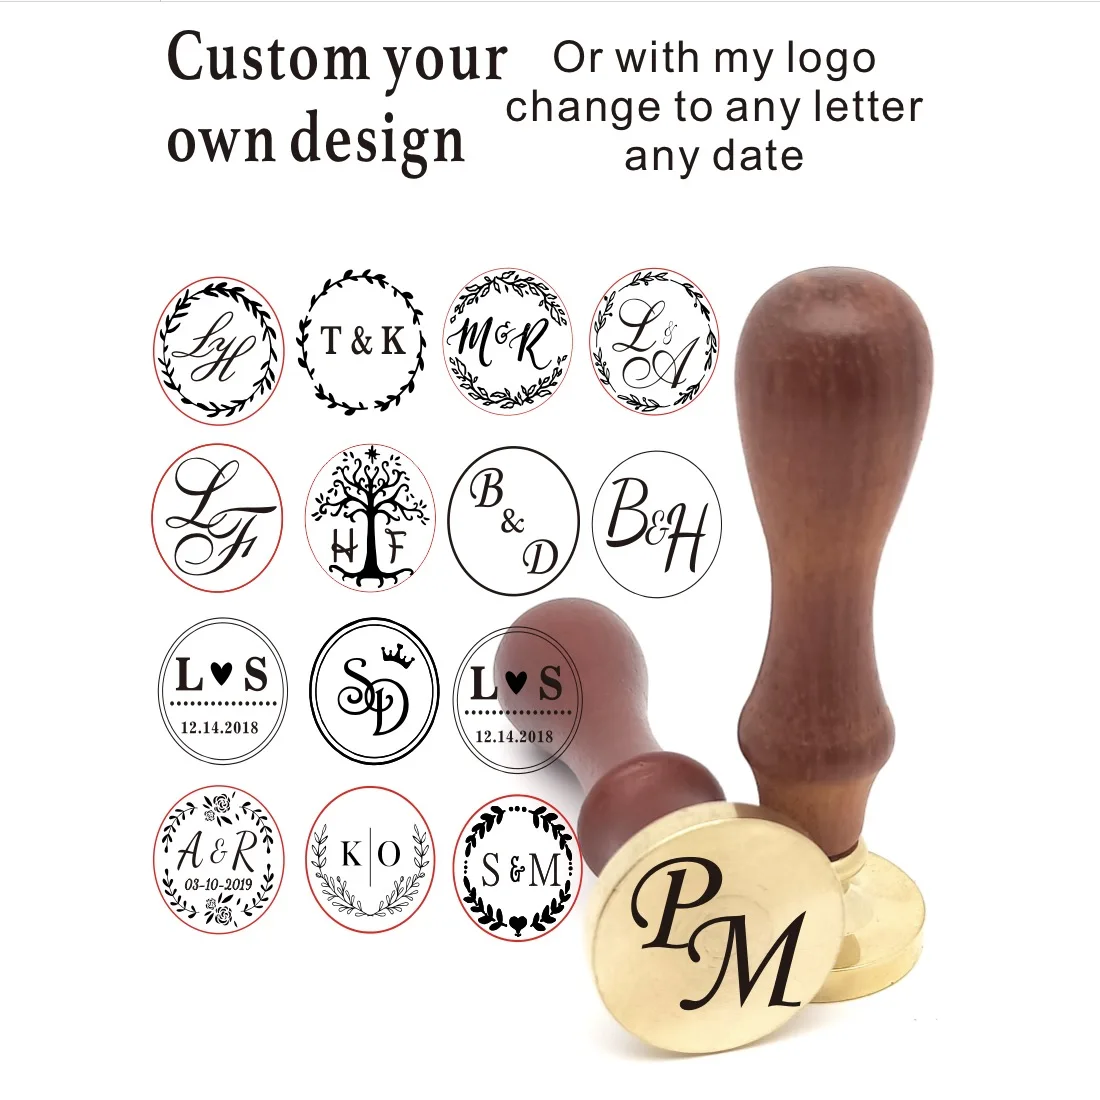 customize your logo Personalized image custom weeding Invitation initials and date Letter for Wax Seal stamp sealing wax sealing